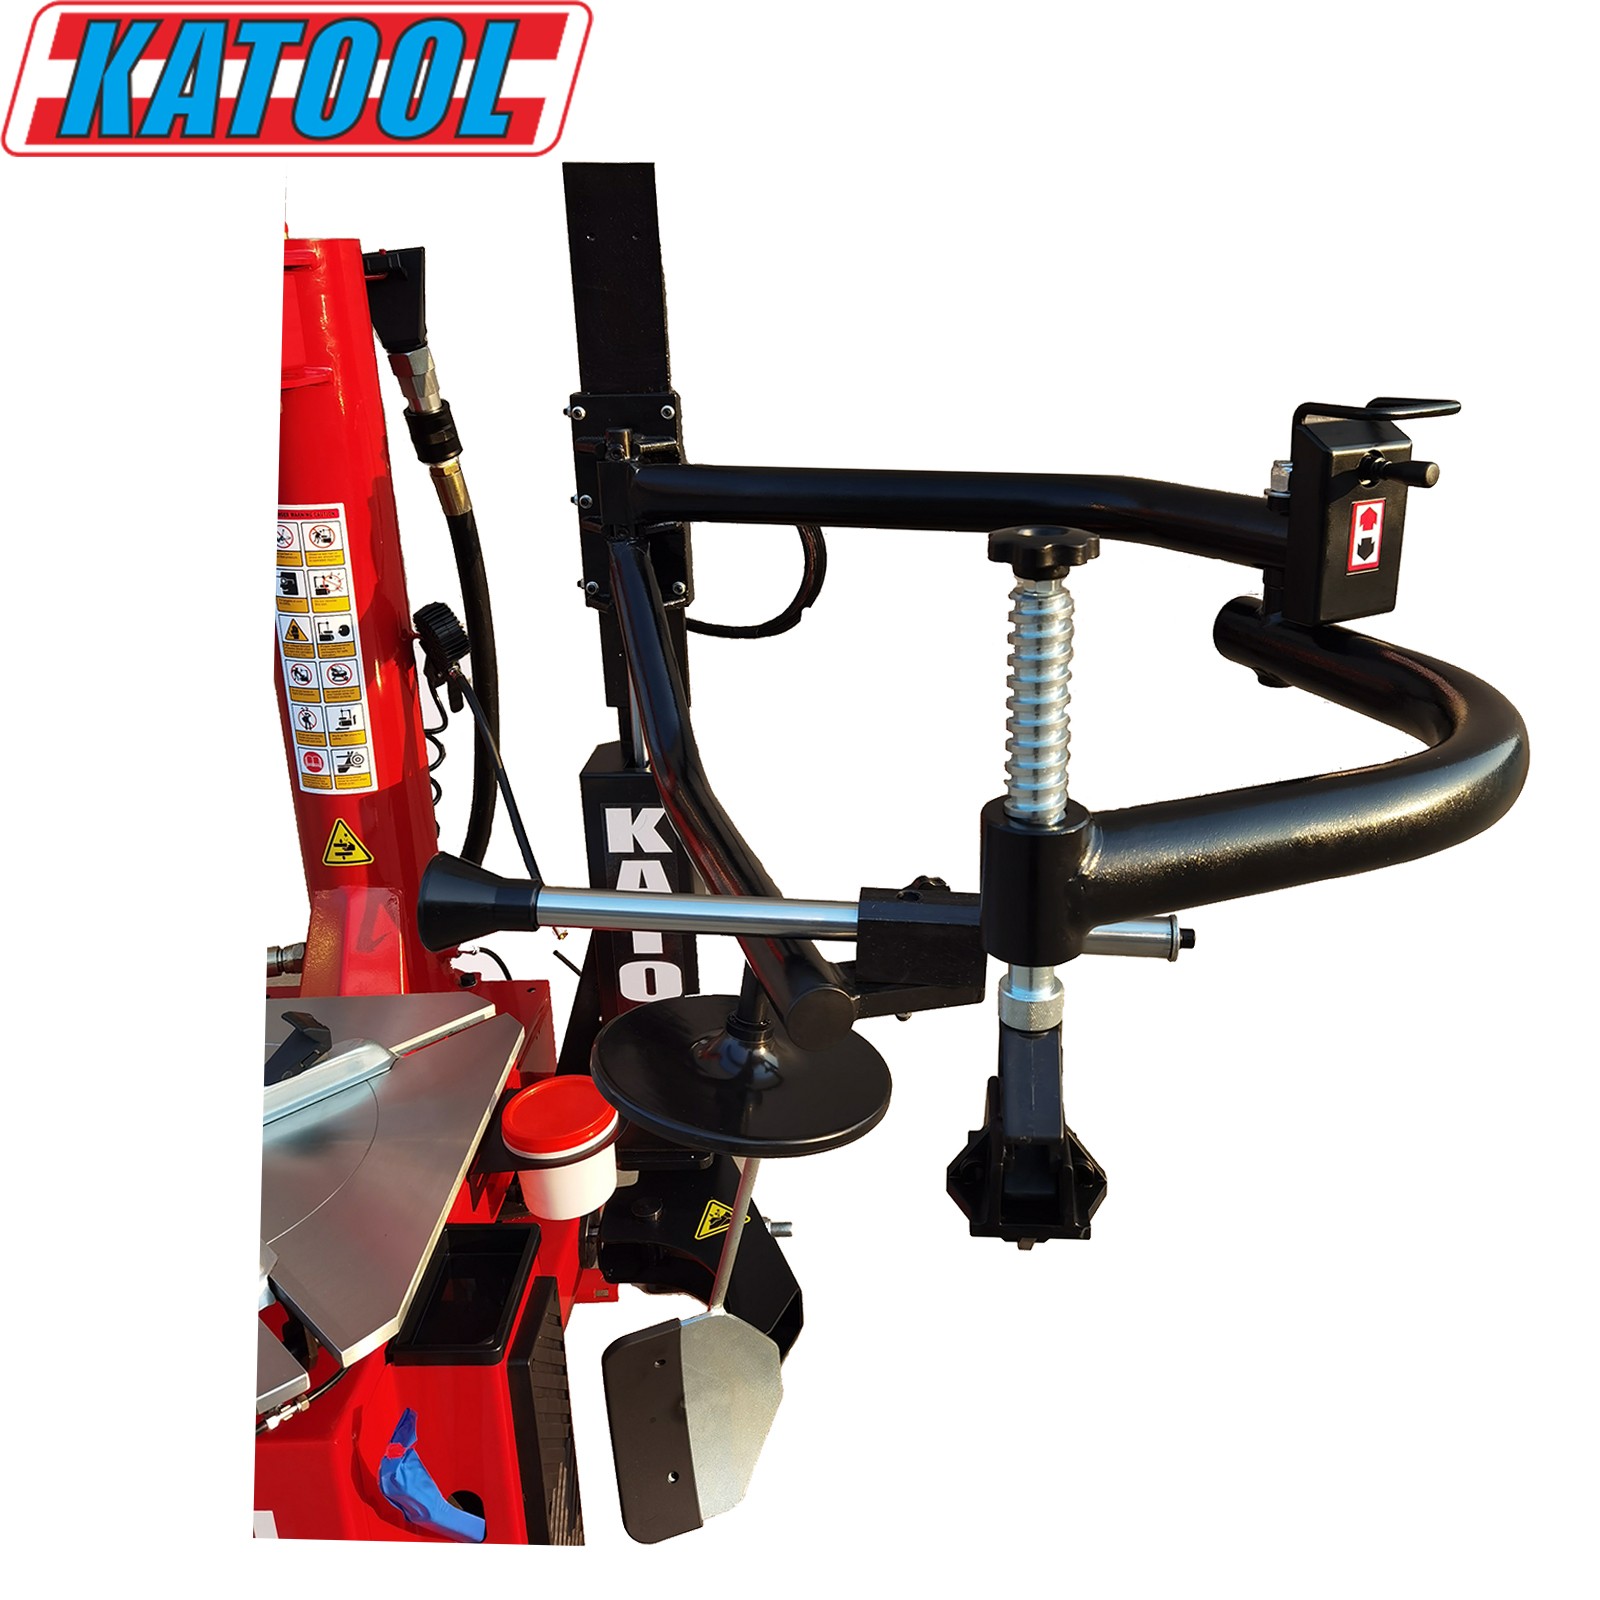 Tire changer 835 and Wheel balancer 700 Combo